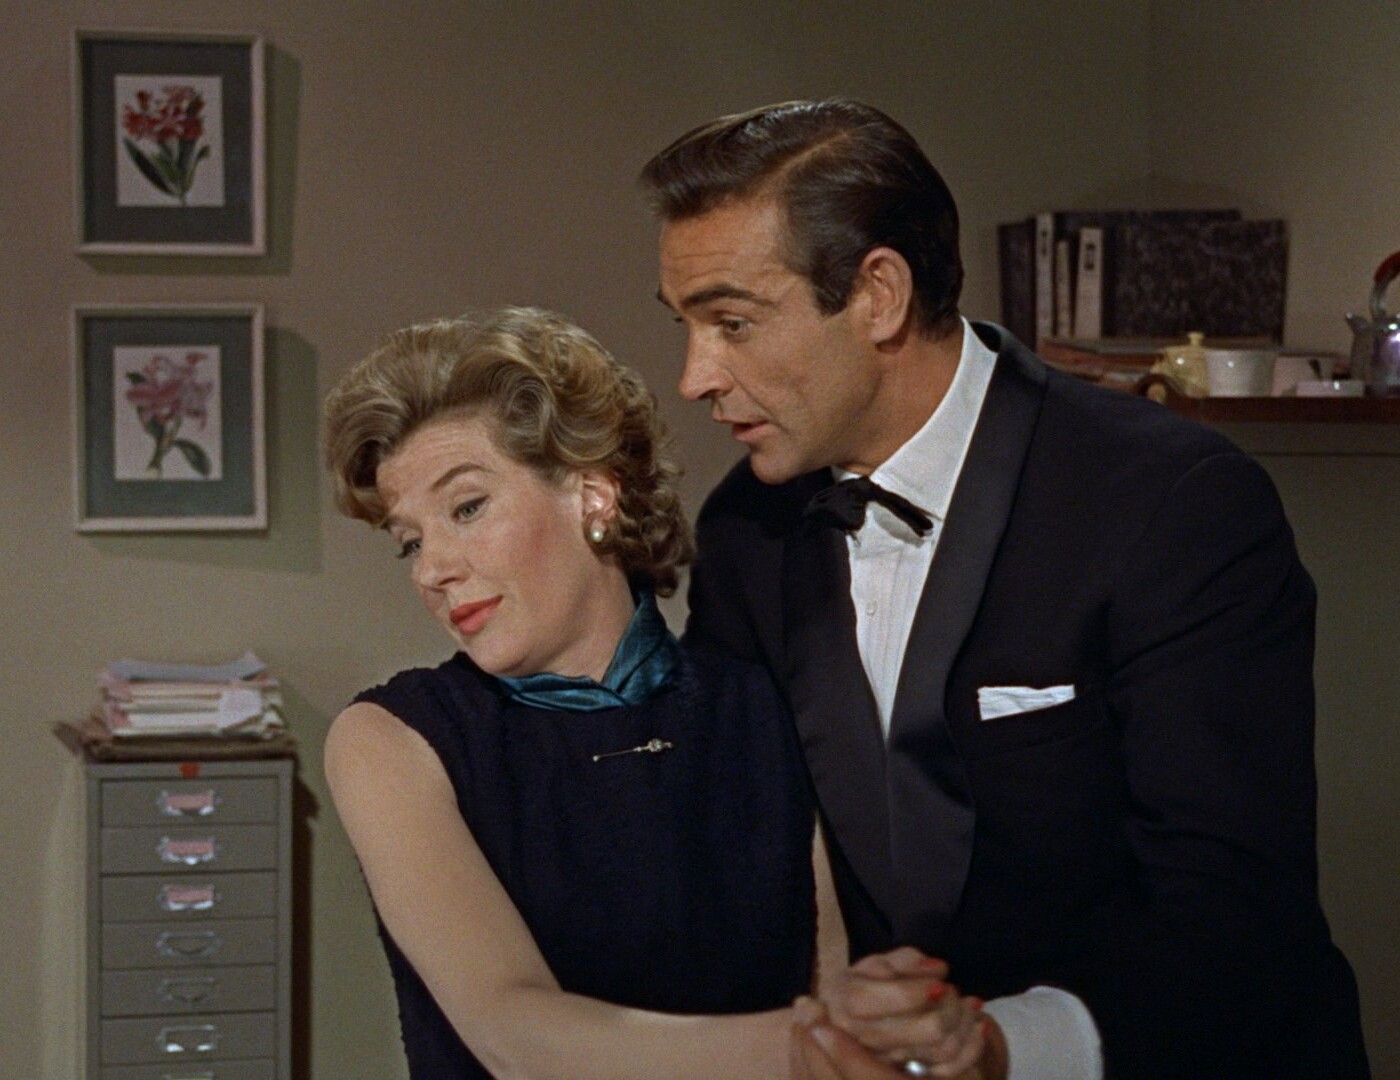 Miss Moneypenny, played by Lois Maxwell